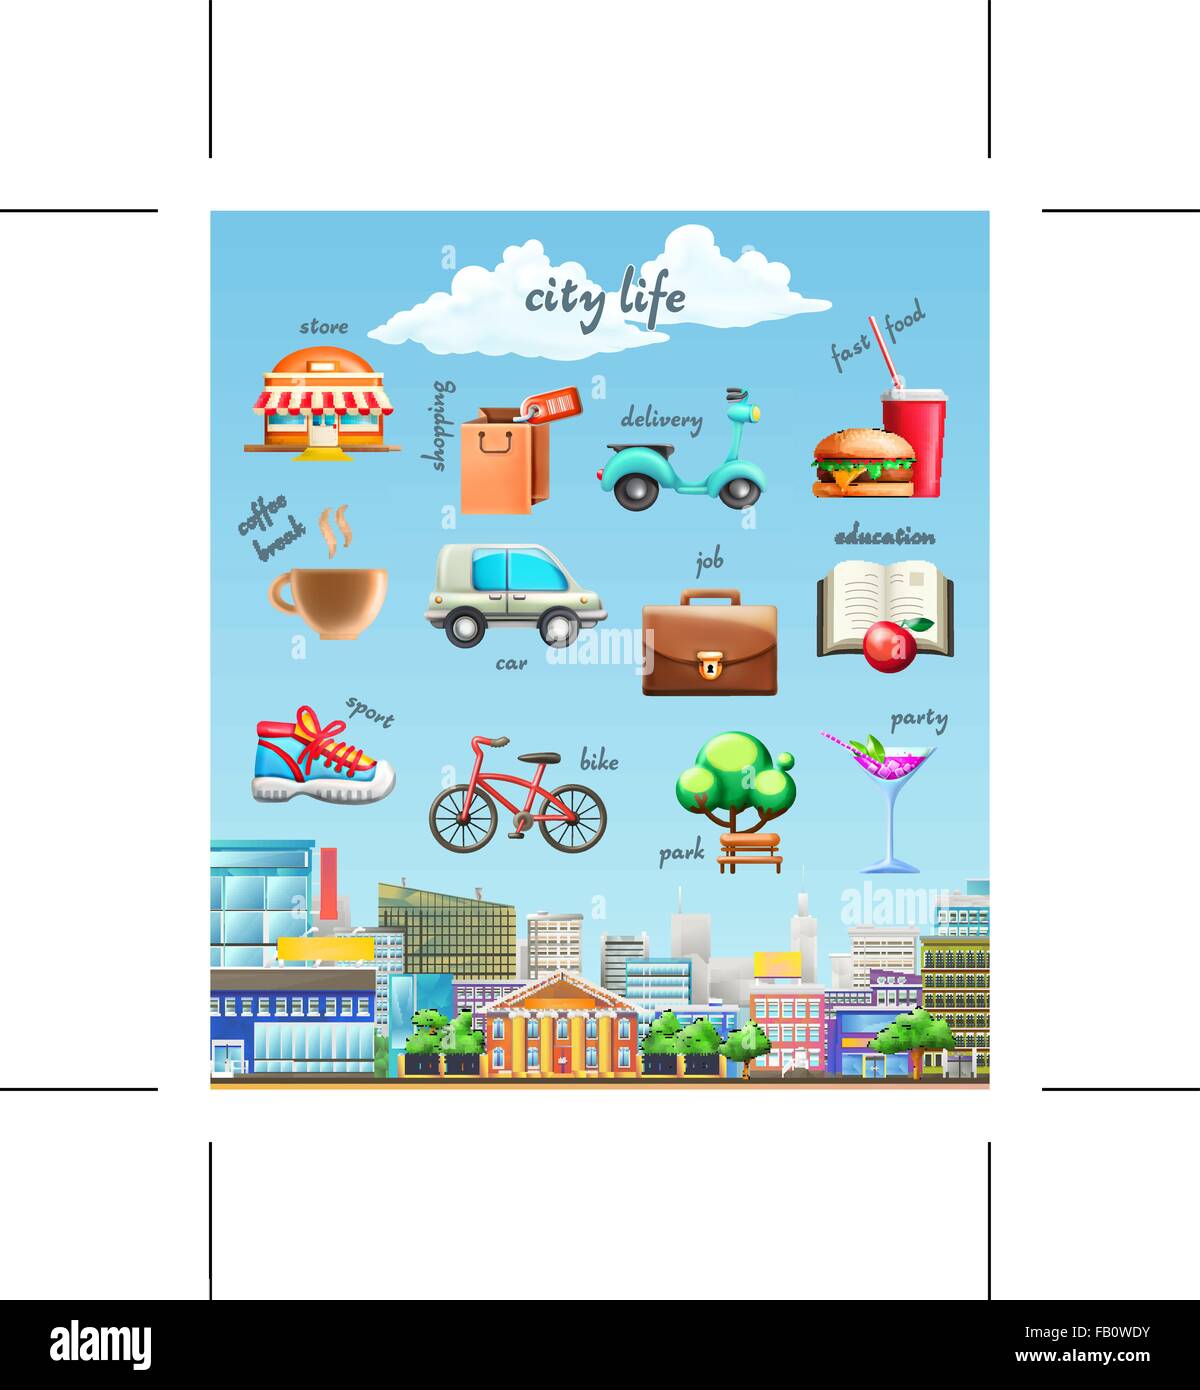 City life, set of vector icons Stock Vector